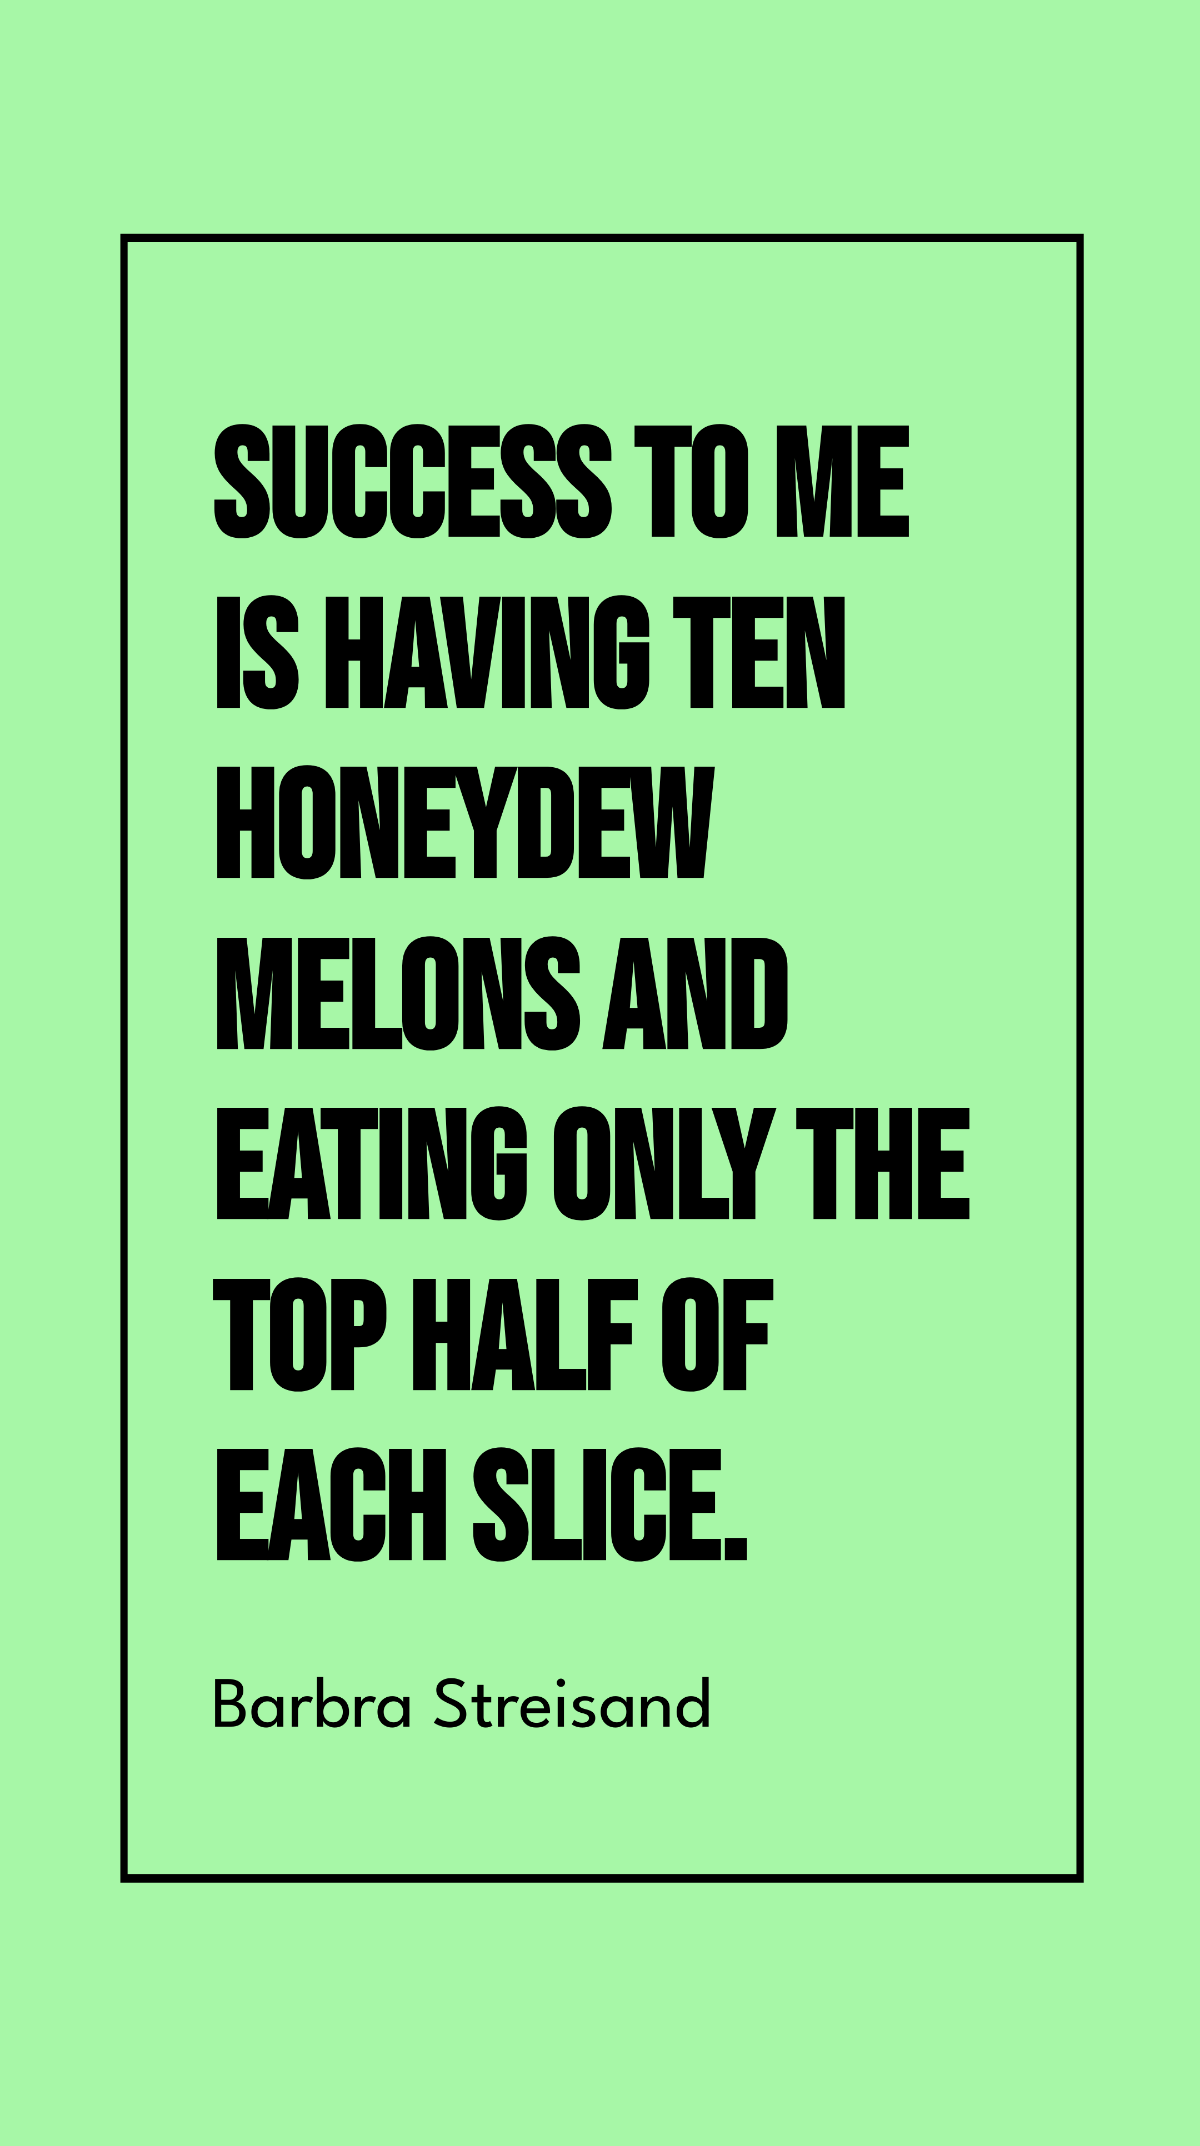 Barbra Streisand - Success to me is having ten honeydew melons and eating only the top half of each slice. Template